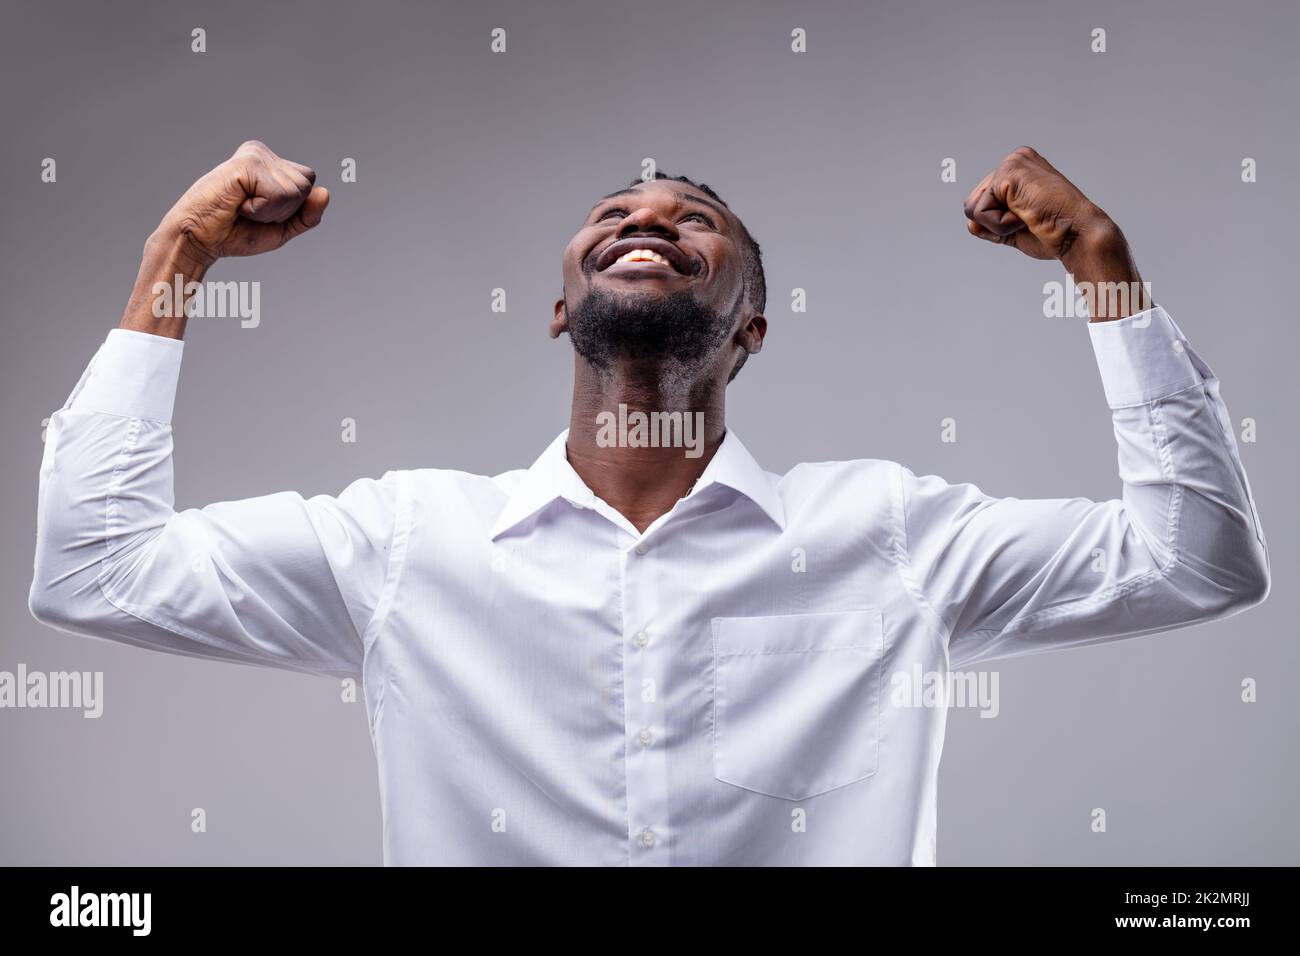 afroamerican man with his arms raised Stock Photo